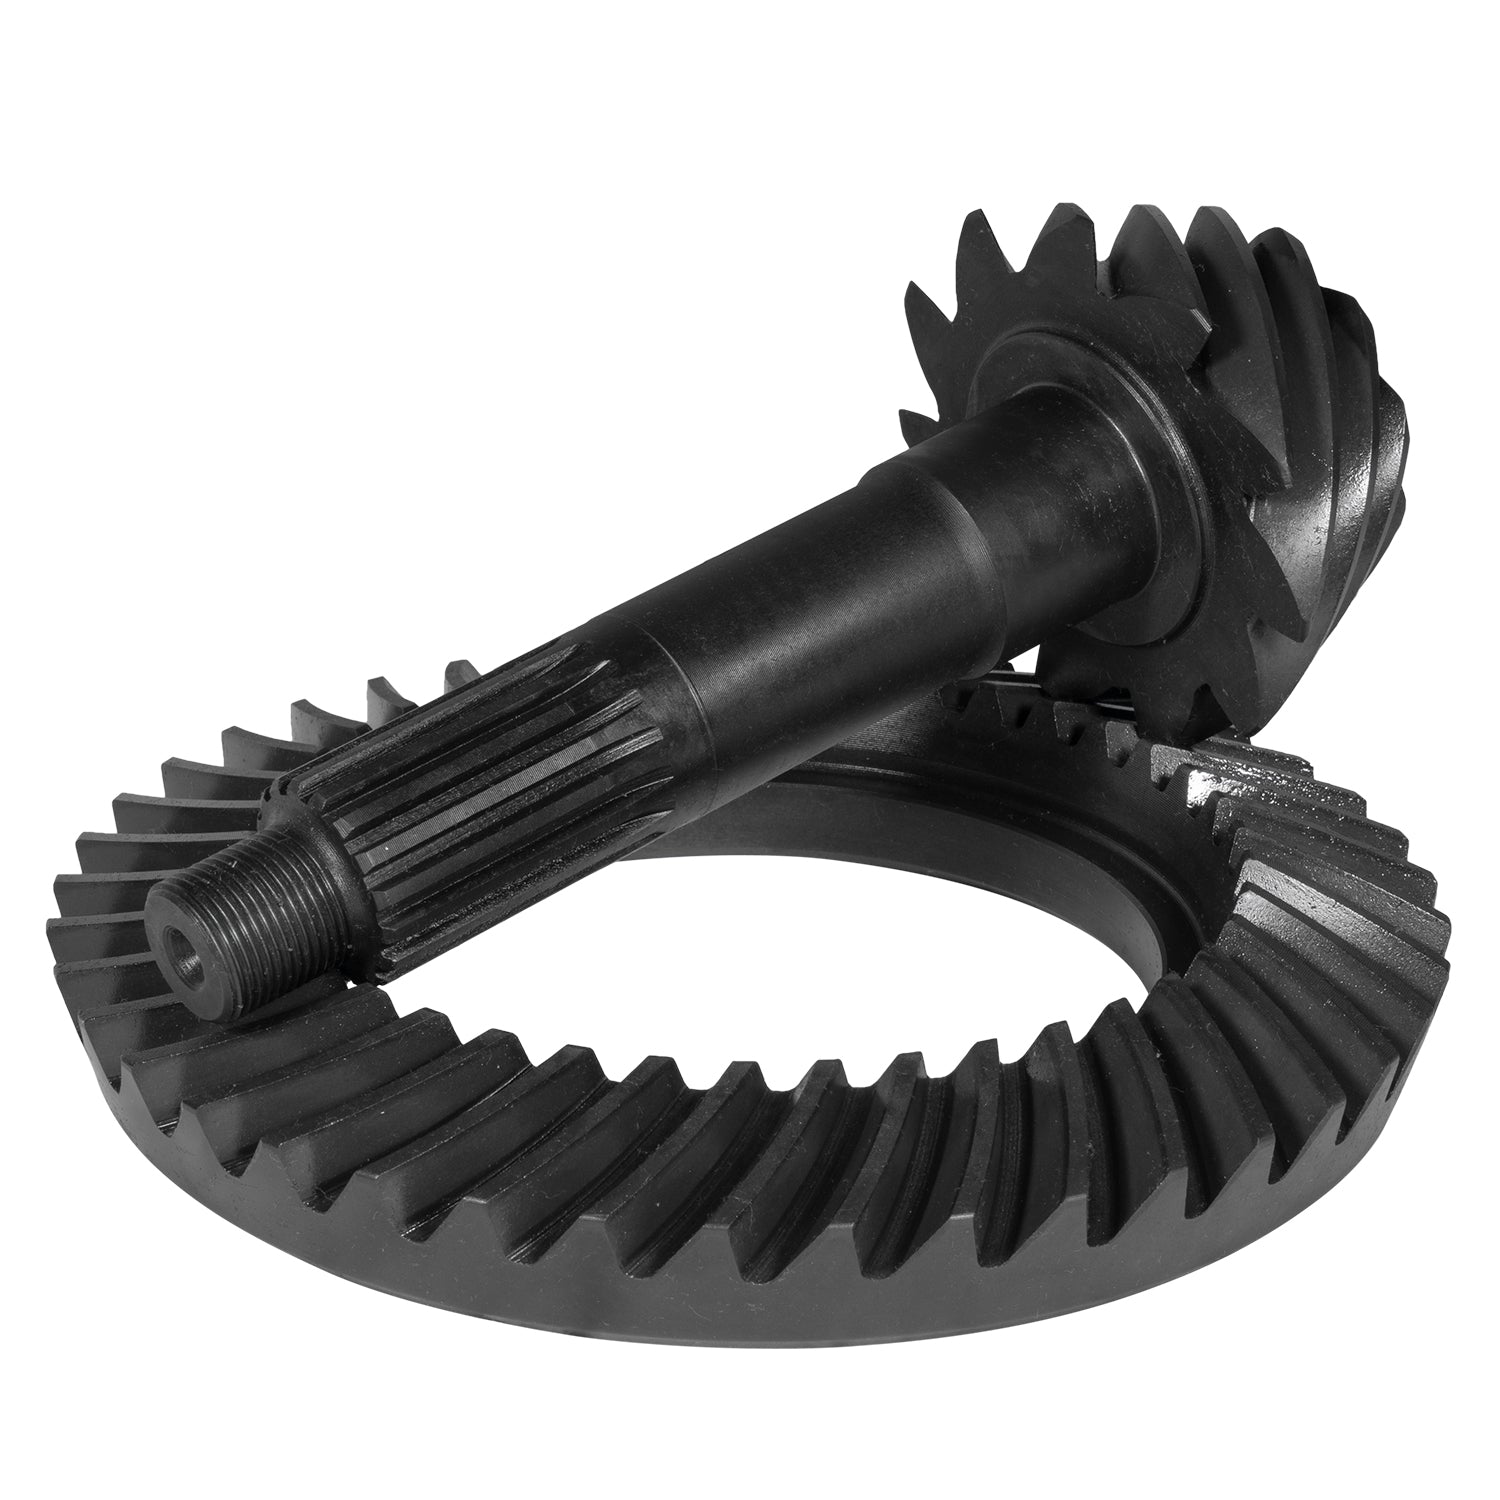 Yukon Gear Chevrolet Differential Ring and Pinion Kit - Rear YGK2367